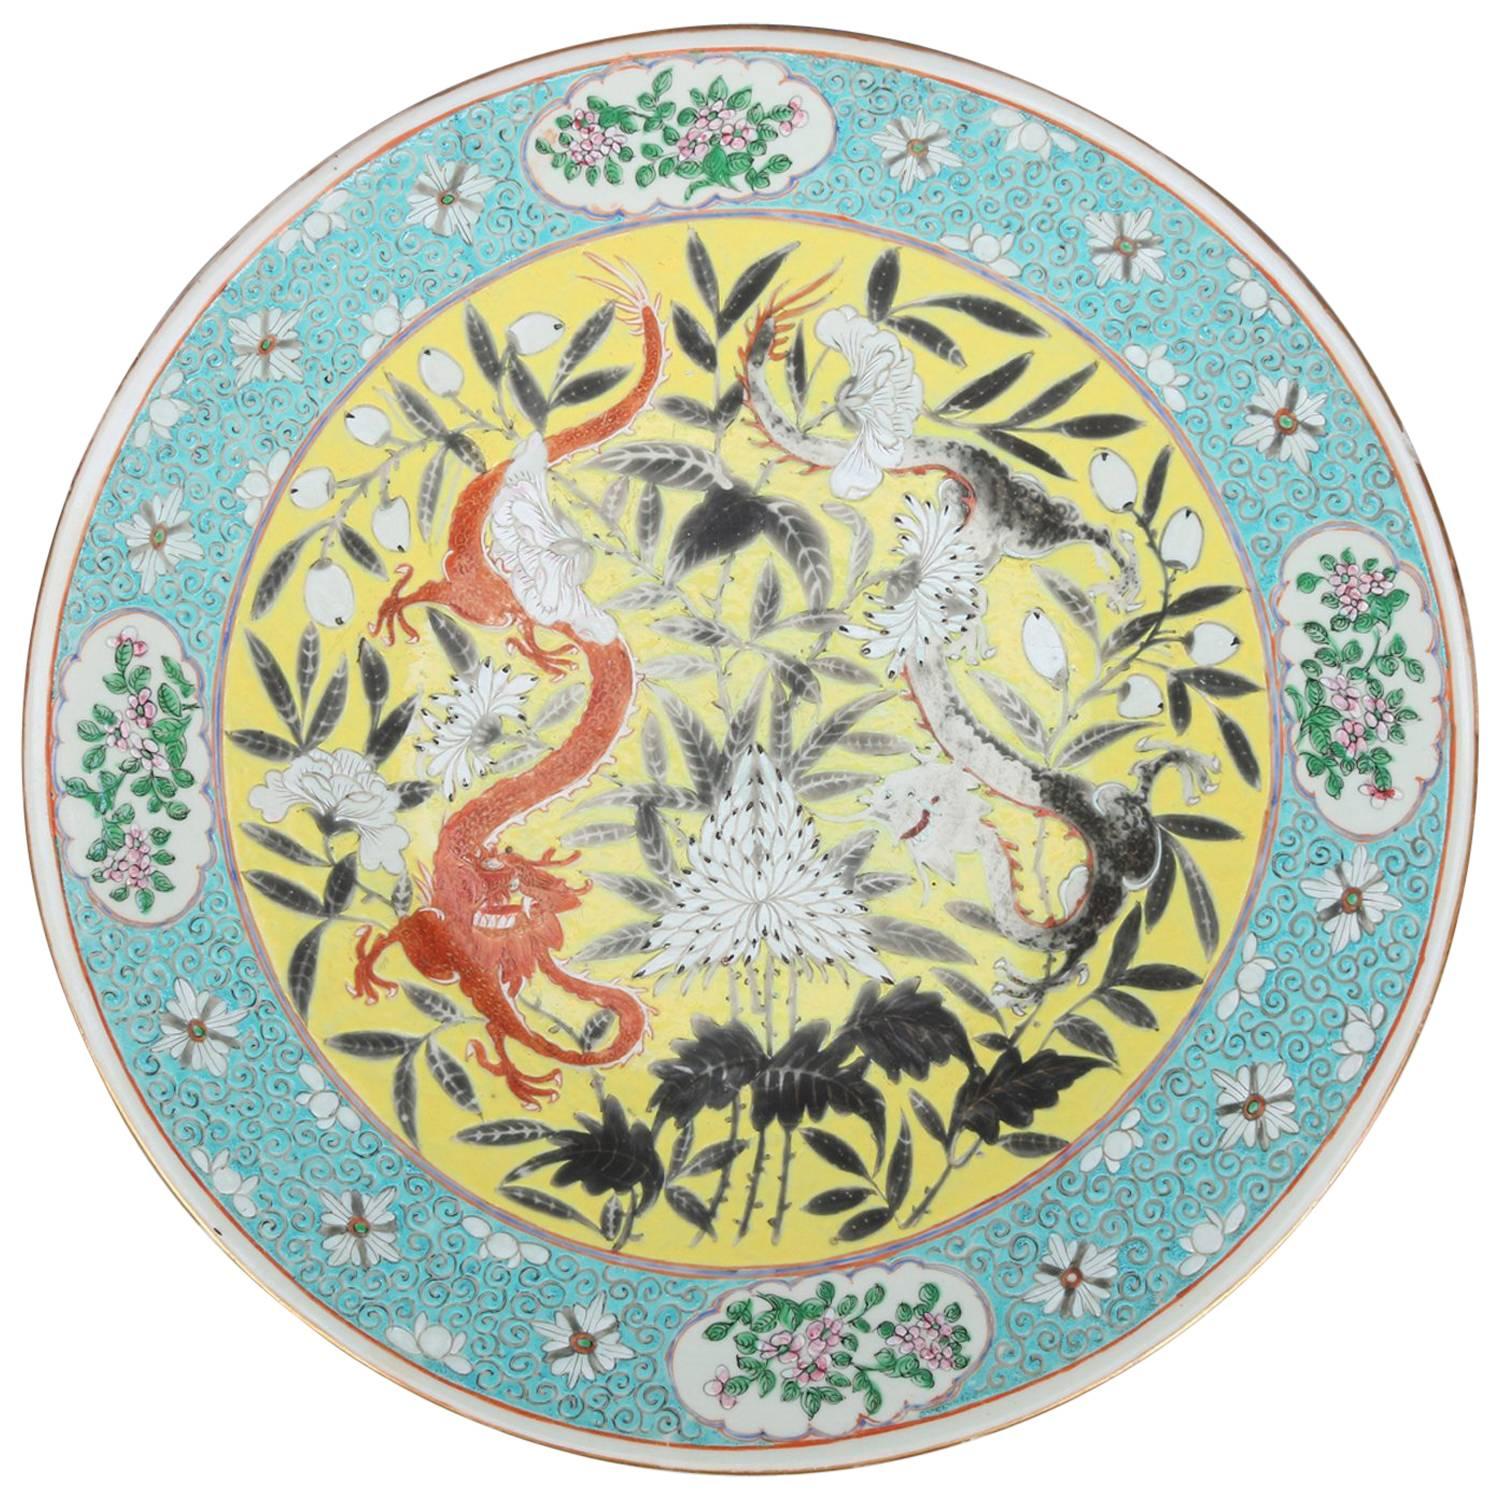 Chinese Export Famille Rose Enameled Porcelain Charger, Floral with Dragons